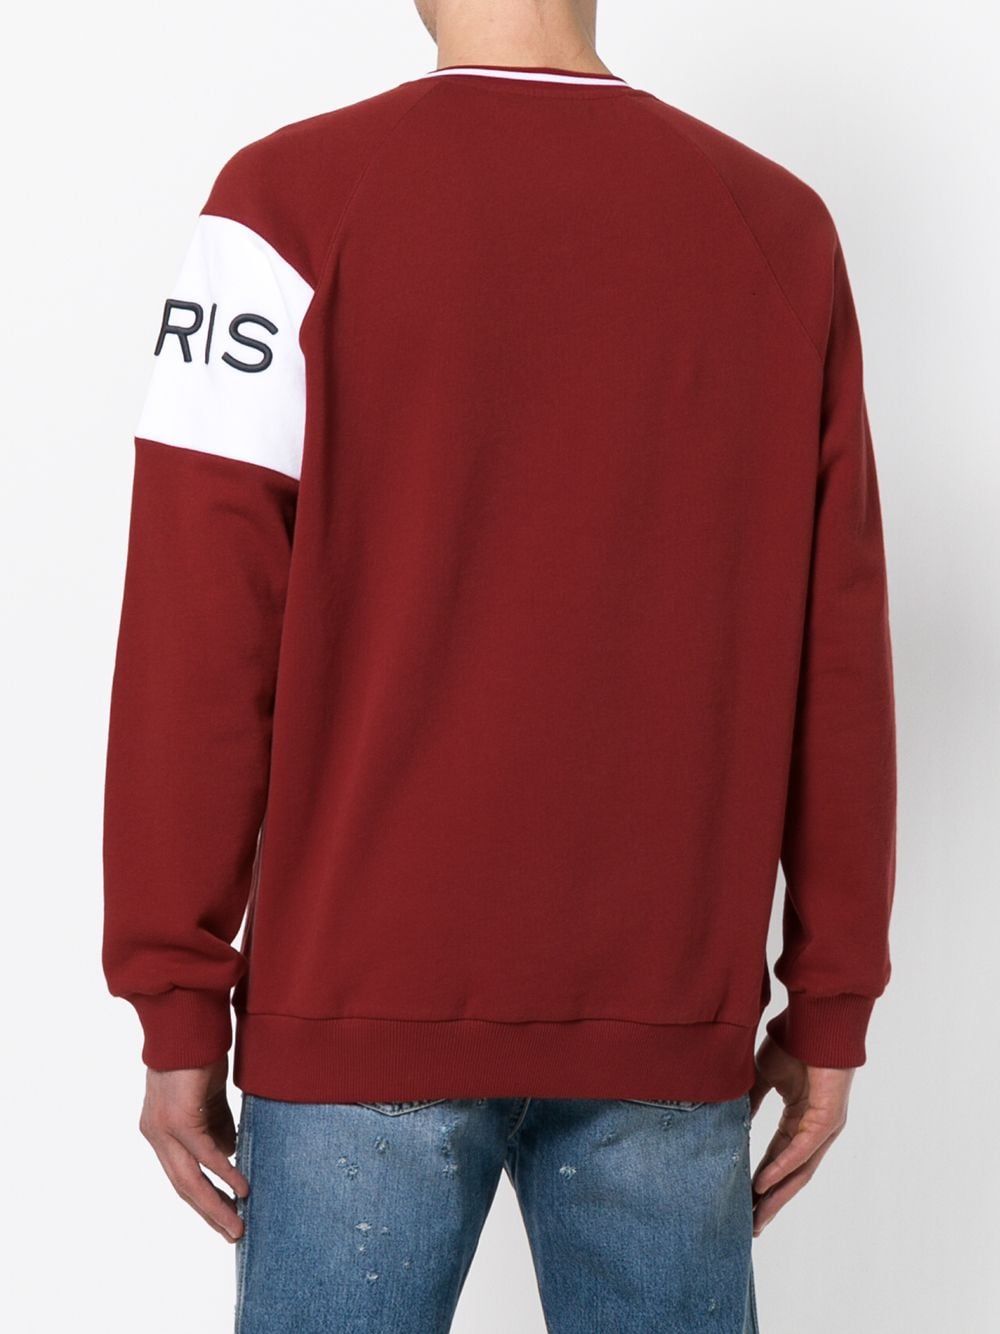 givenchy 4g embroidered sweatshirt